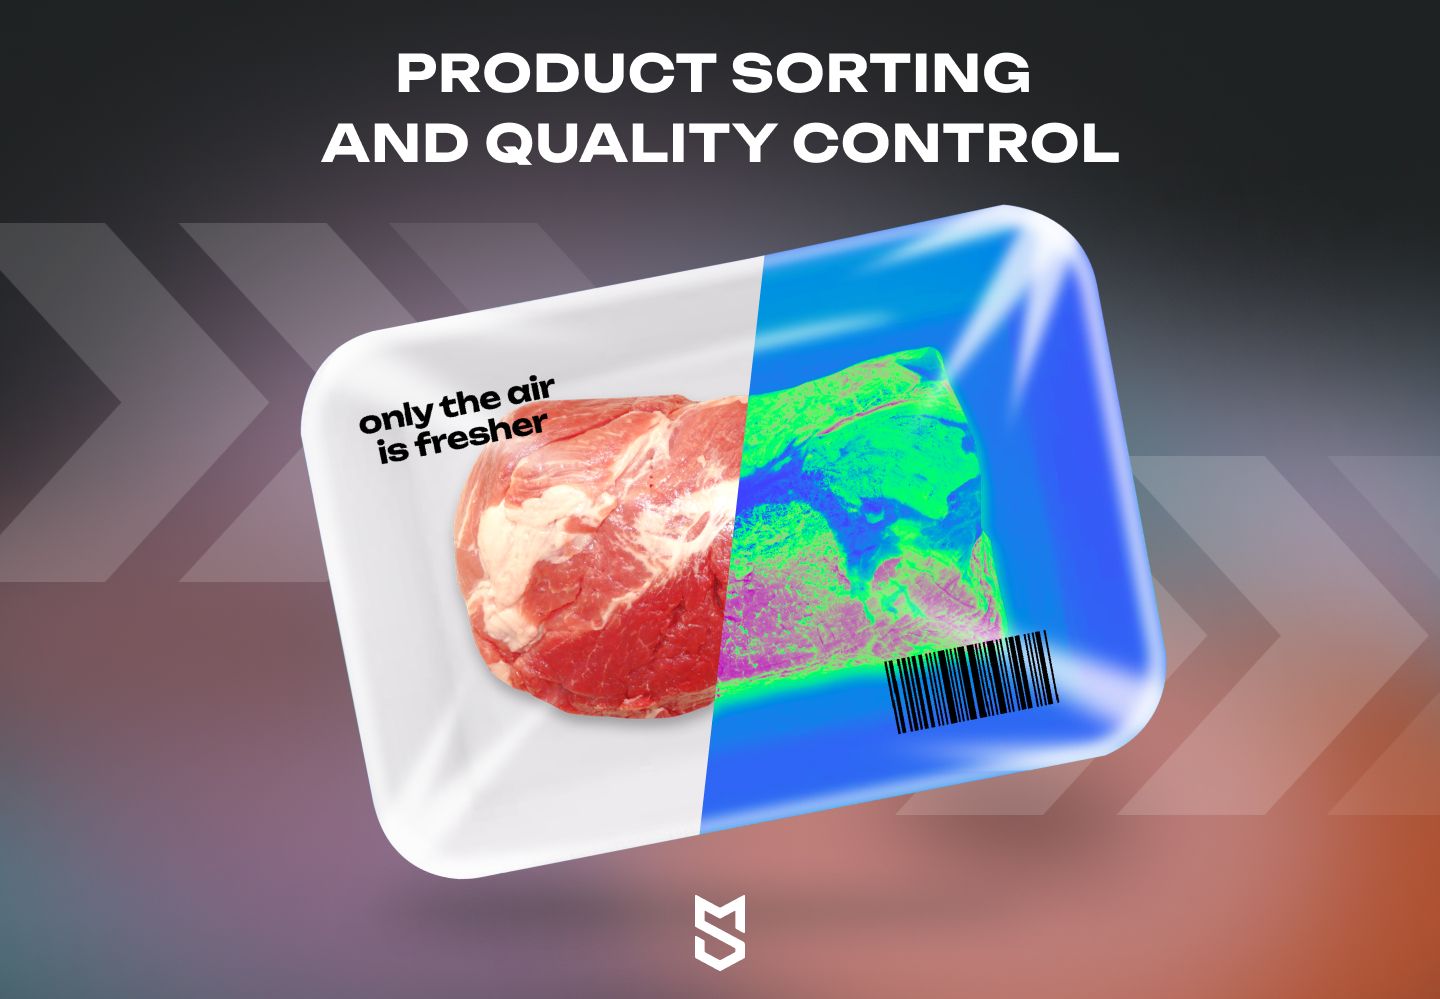 Product sorting and quality control